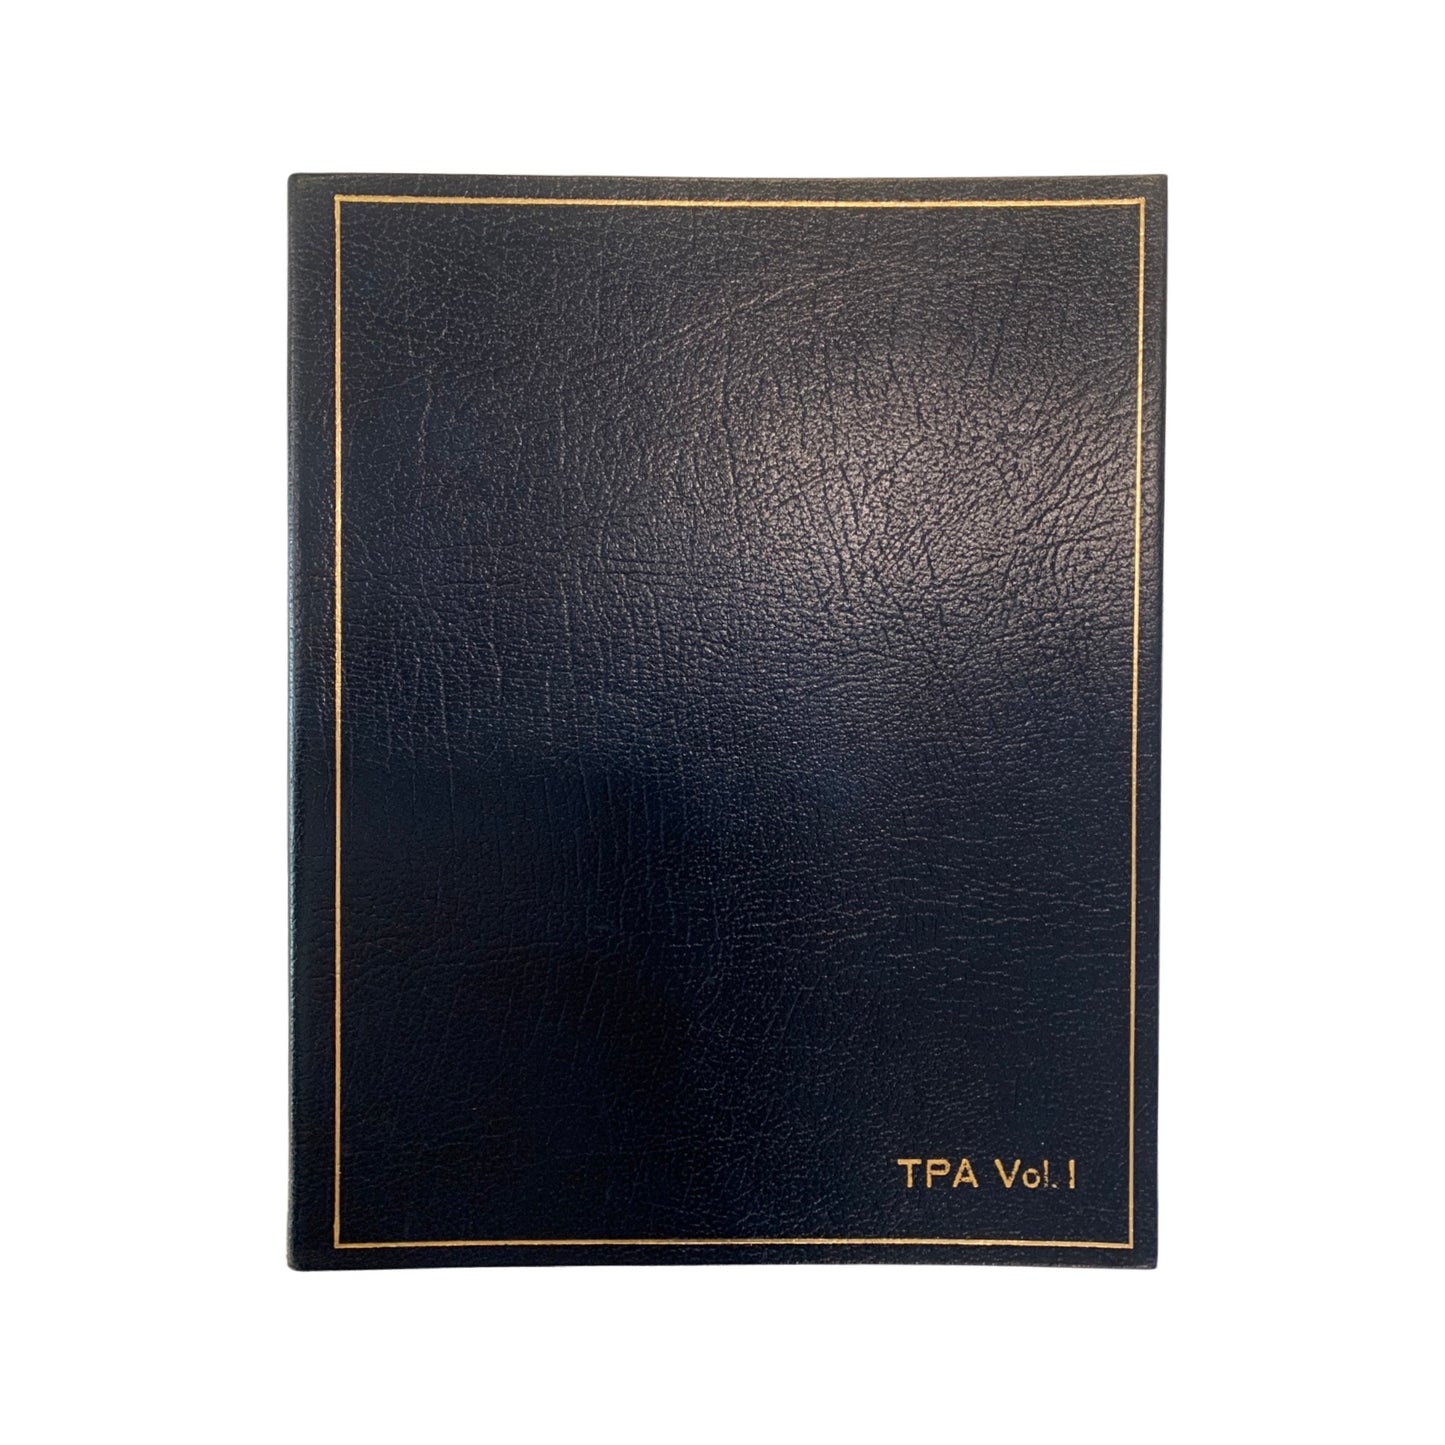 Leather Notebook | 8 x10" | Hardcover Journal | Textured Calf without Padding and Gold | Blank Pages